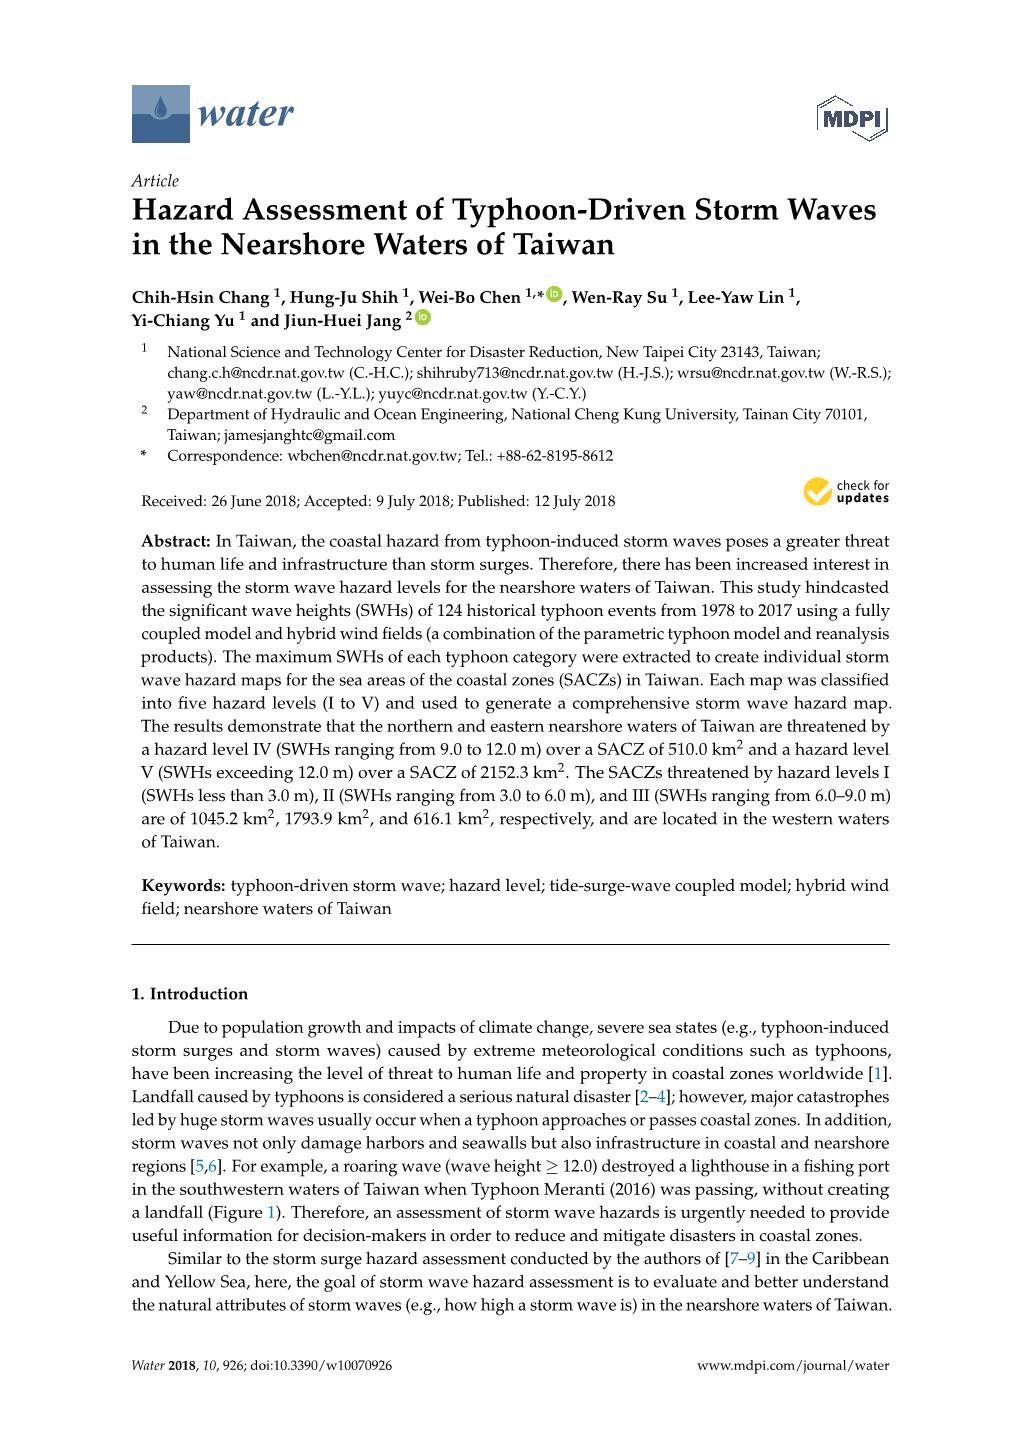 Hazard Assessment of Typhoon-Driven Storm Waves in the Nearshore Waters of Taiwan